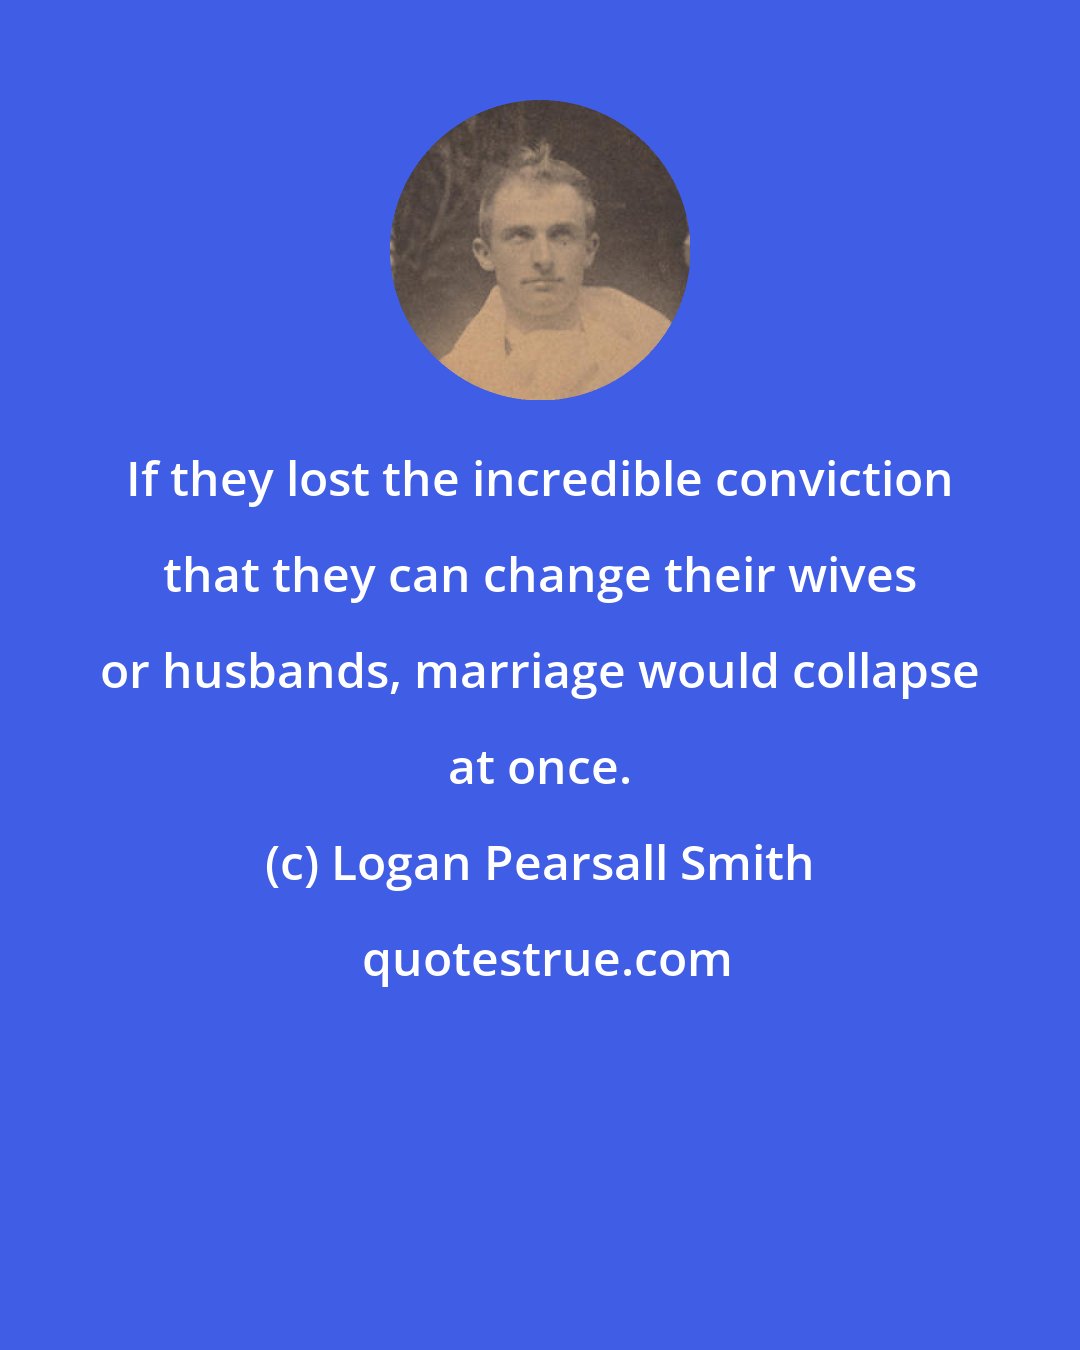 Logan Pearsall Smith: If they lost the incredible conviction that they can change their wives or husbands, marriage would collapse at once.